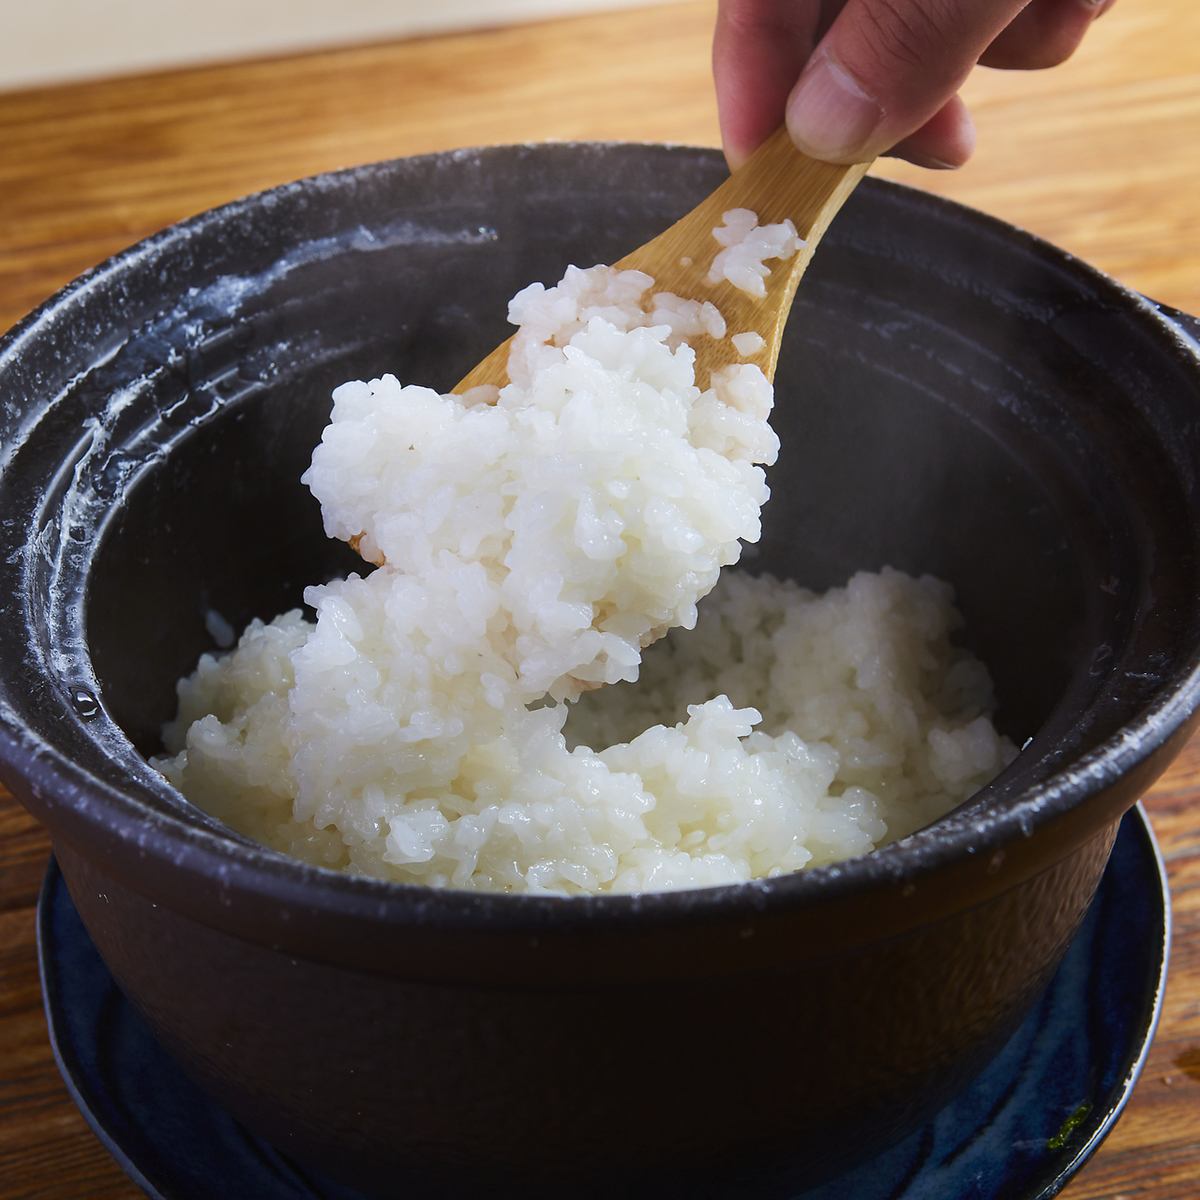 We are particular about the heat and cook to maximize the deliciousness of the rice.